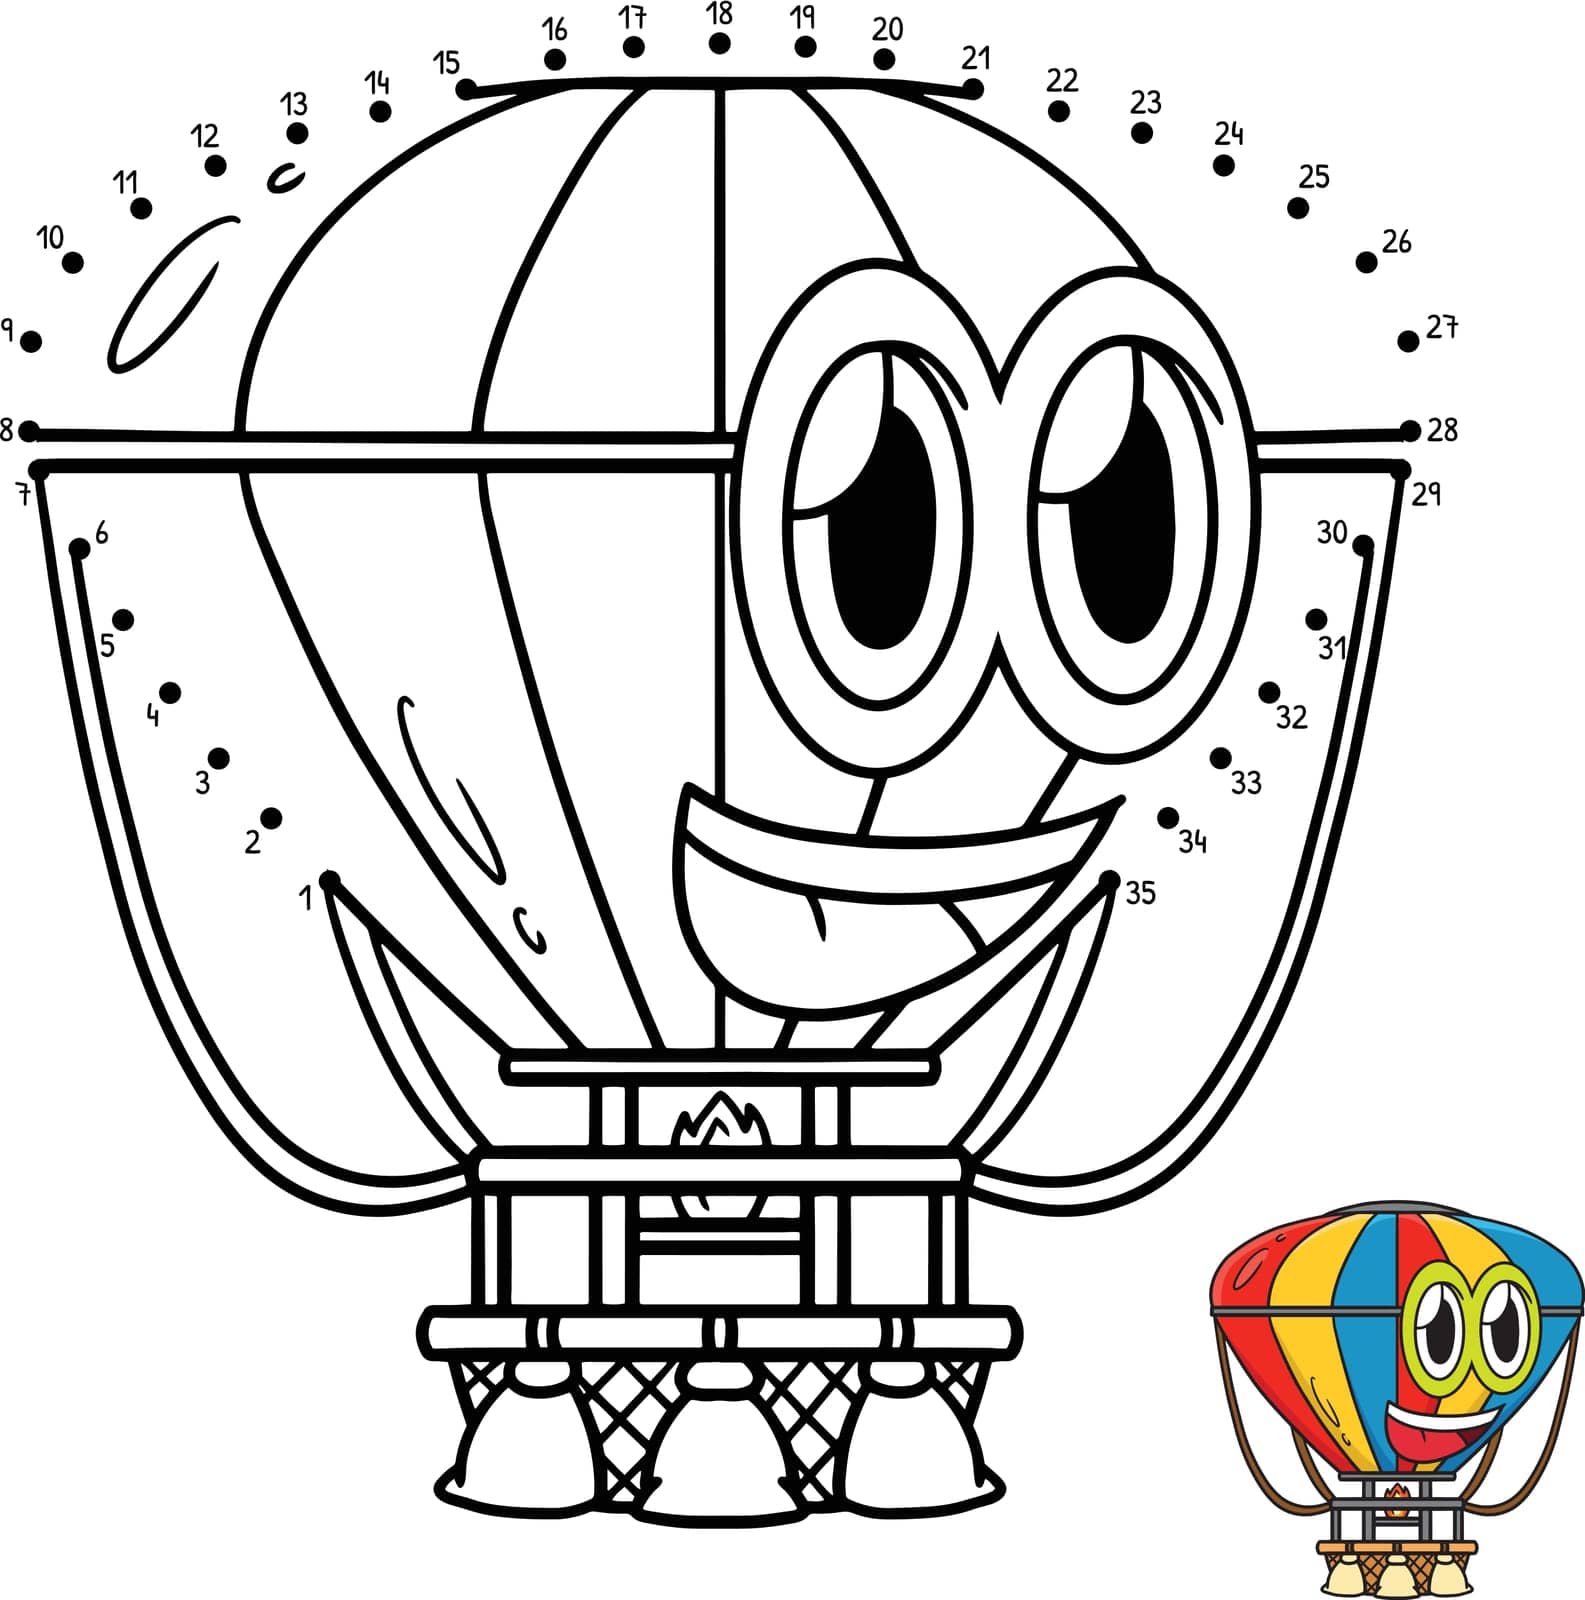 A cute and funny connect the dots Hot Air Balloon with Face Vehicle coloring page.